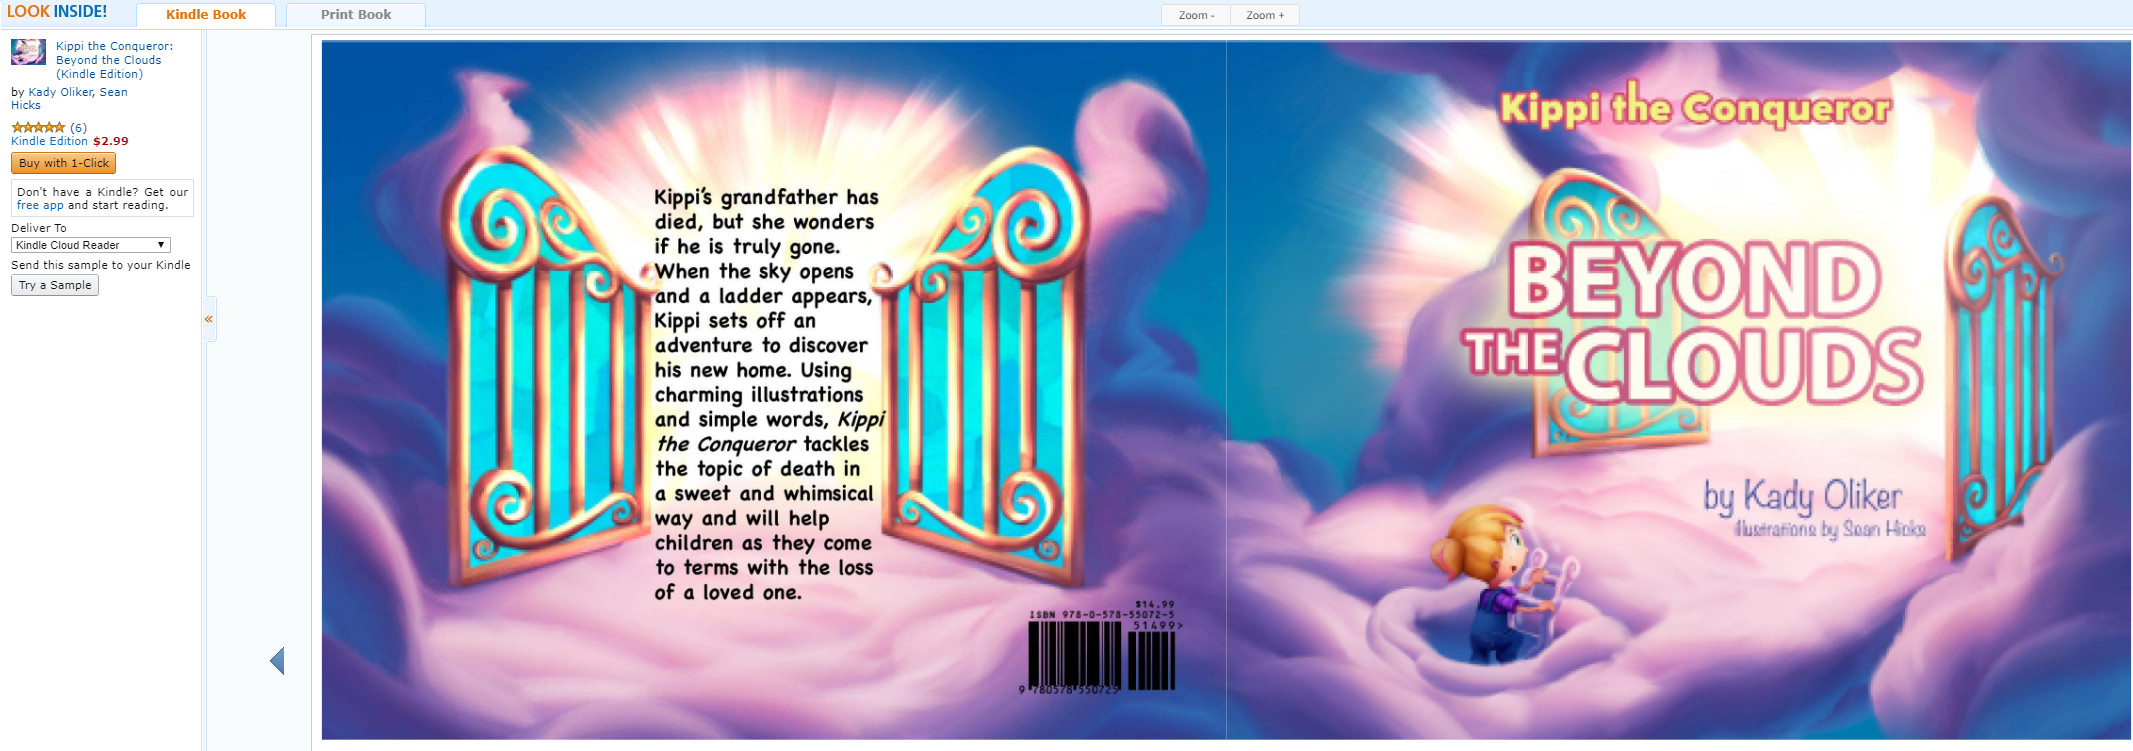 Book cover illustrations with title and description; word formatting by Kady Oliker 